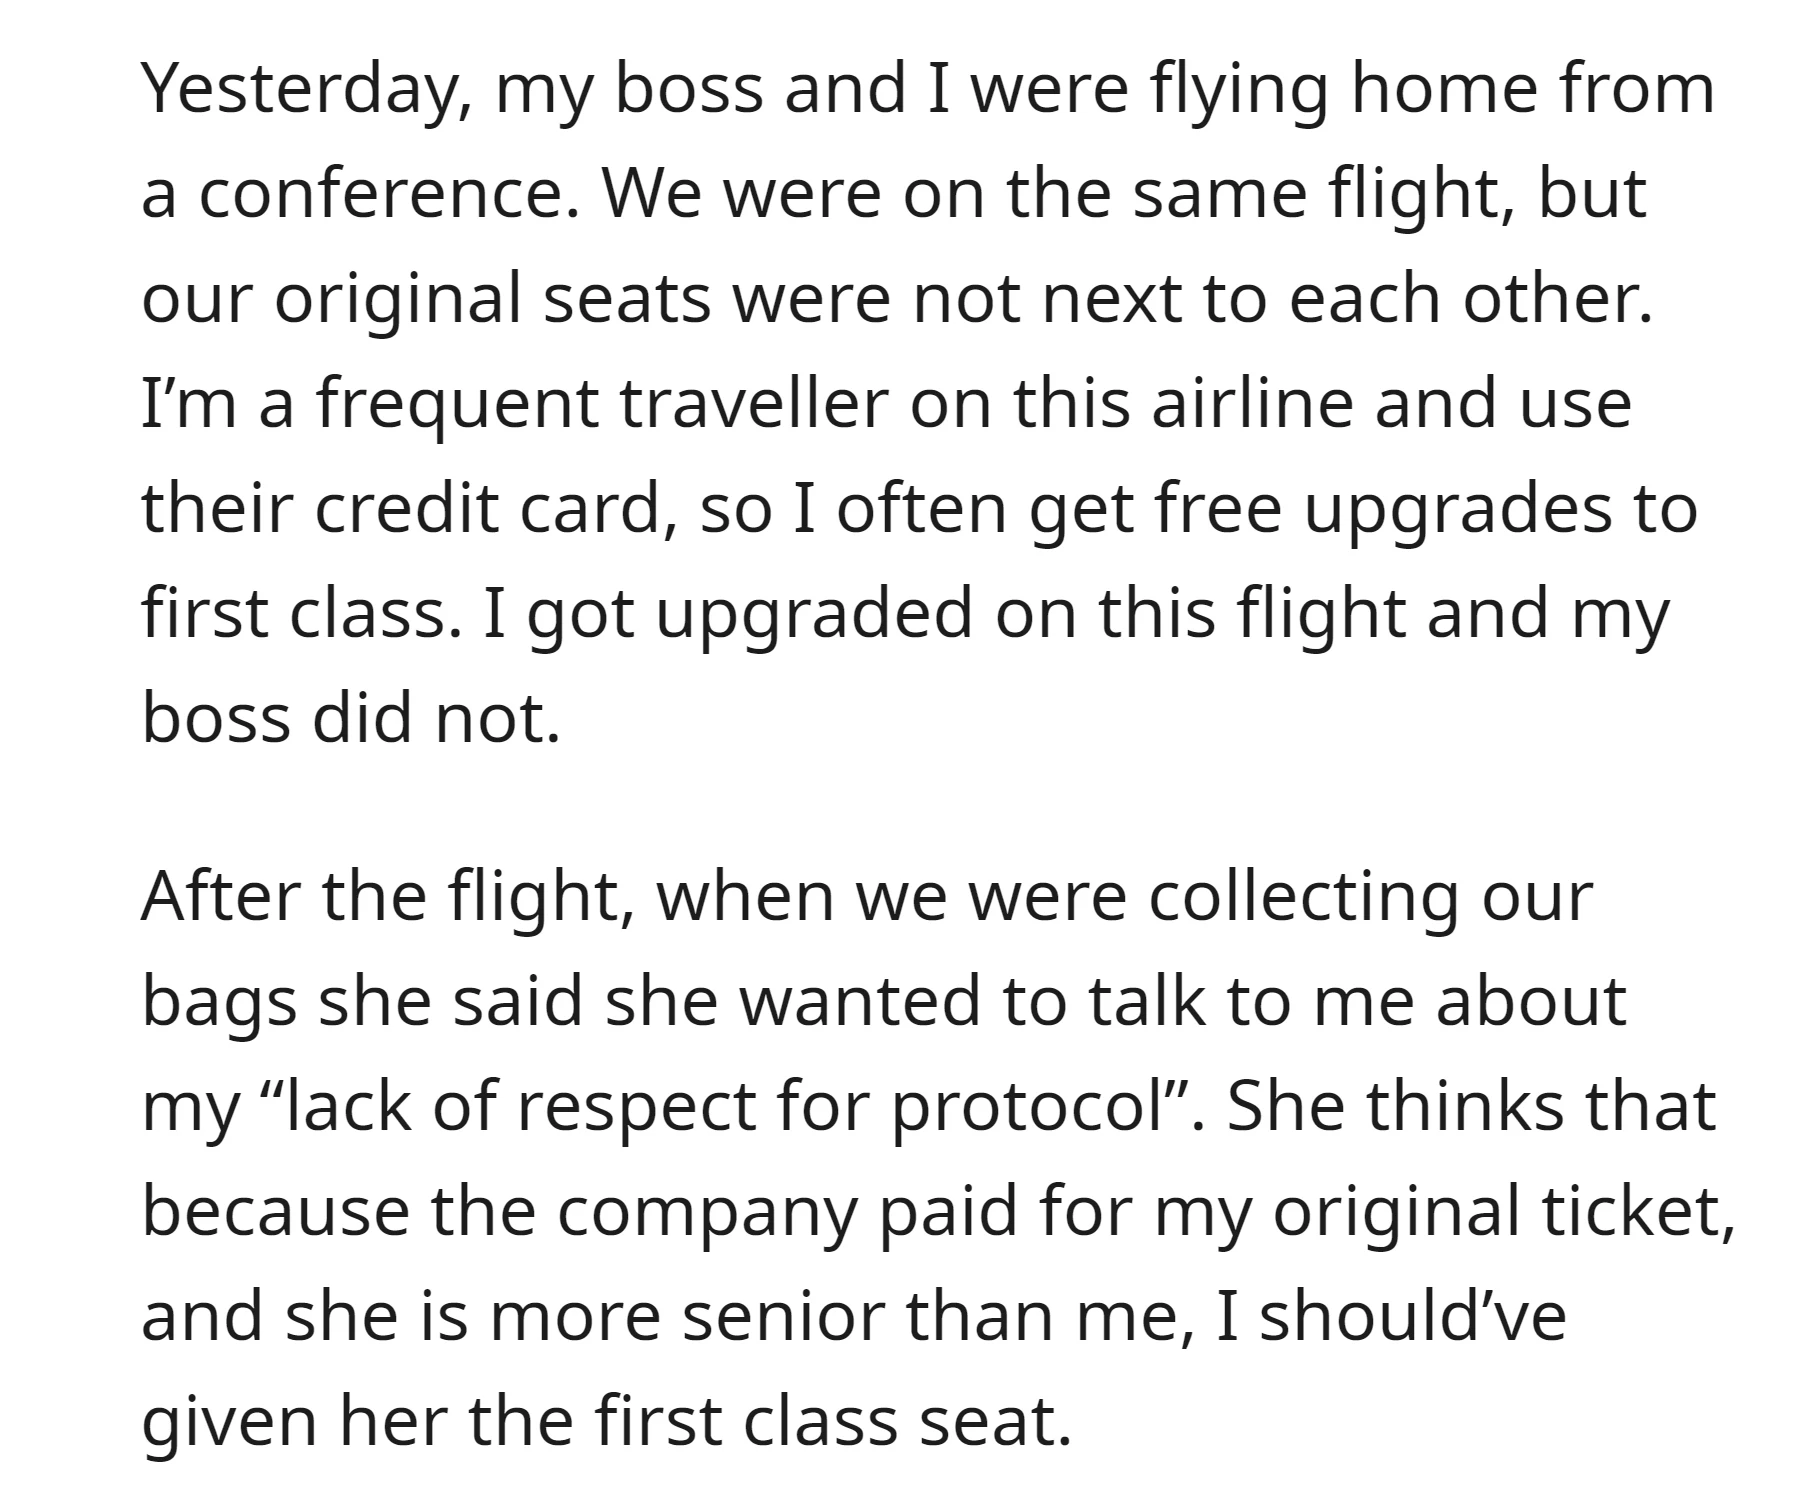 OP's boss insisted that the first-class seat should have been offered to her instead of the OP